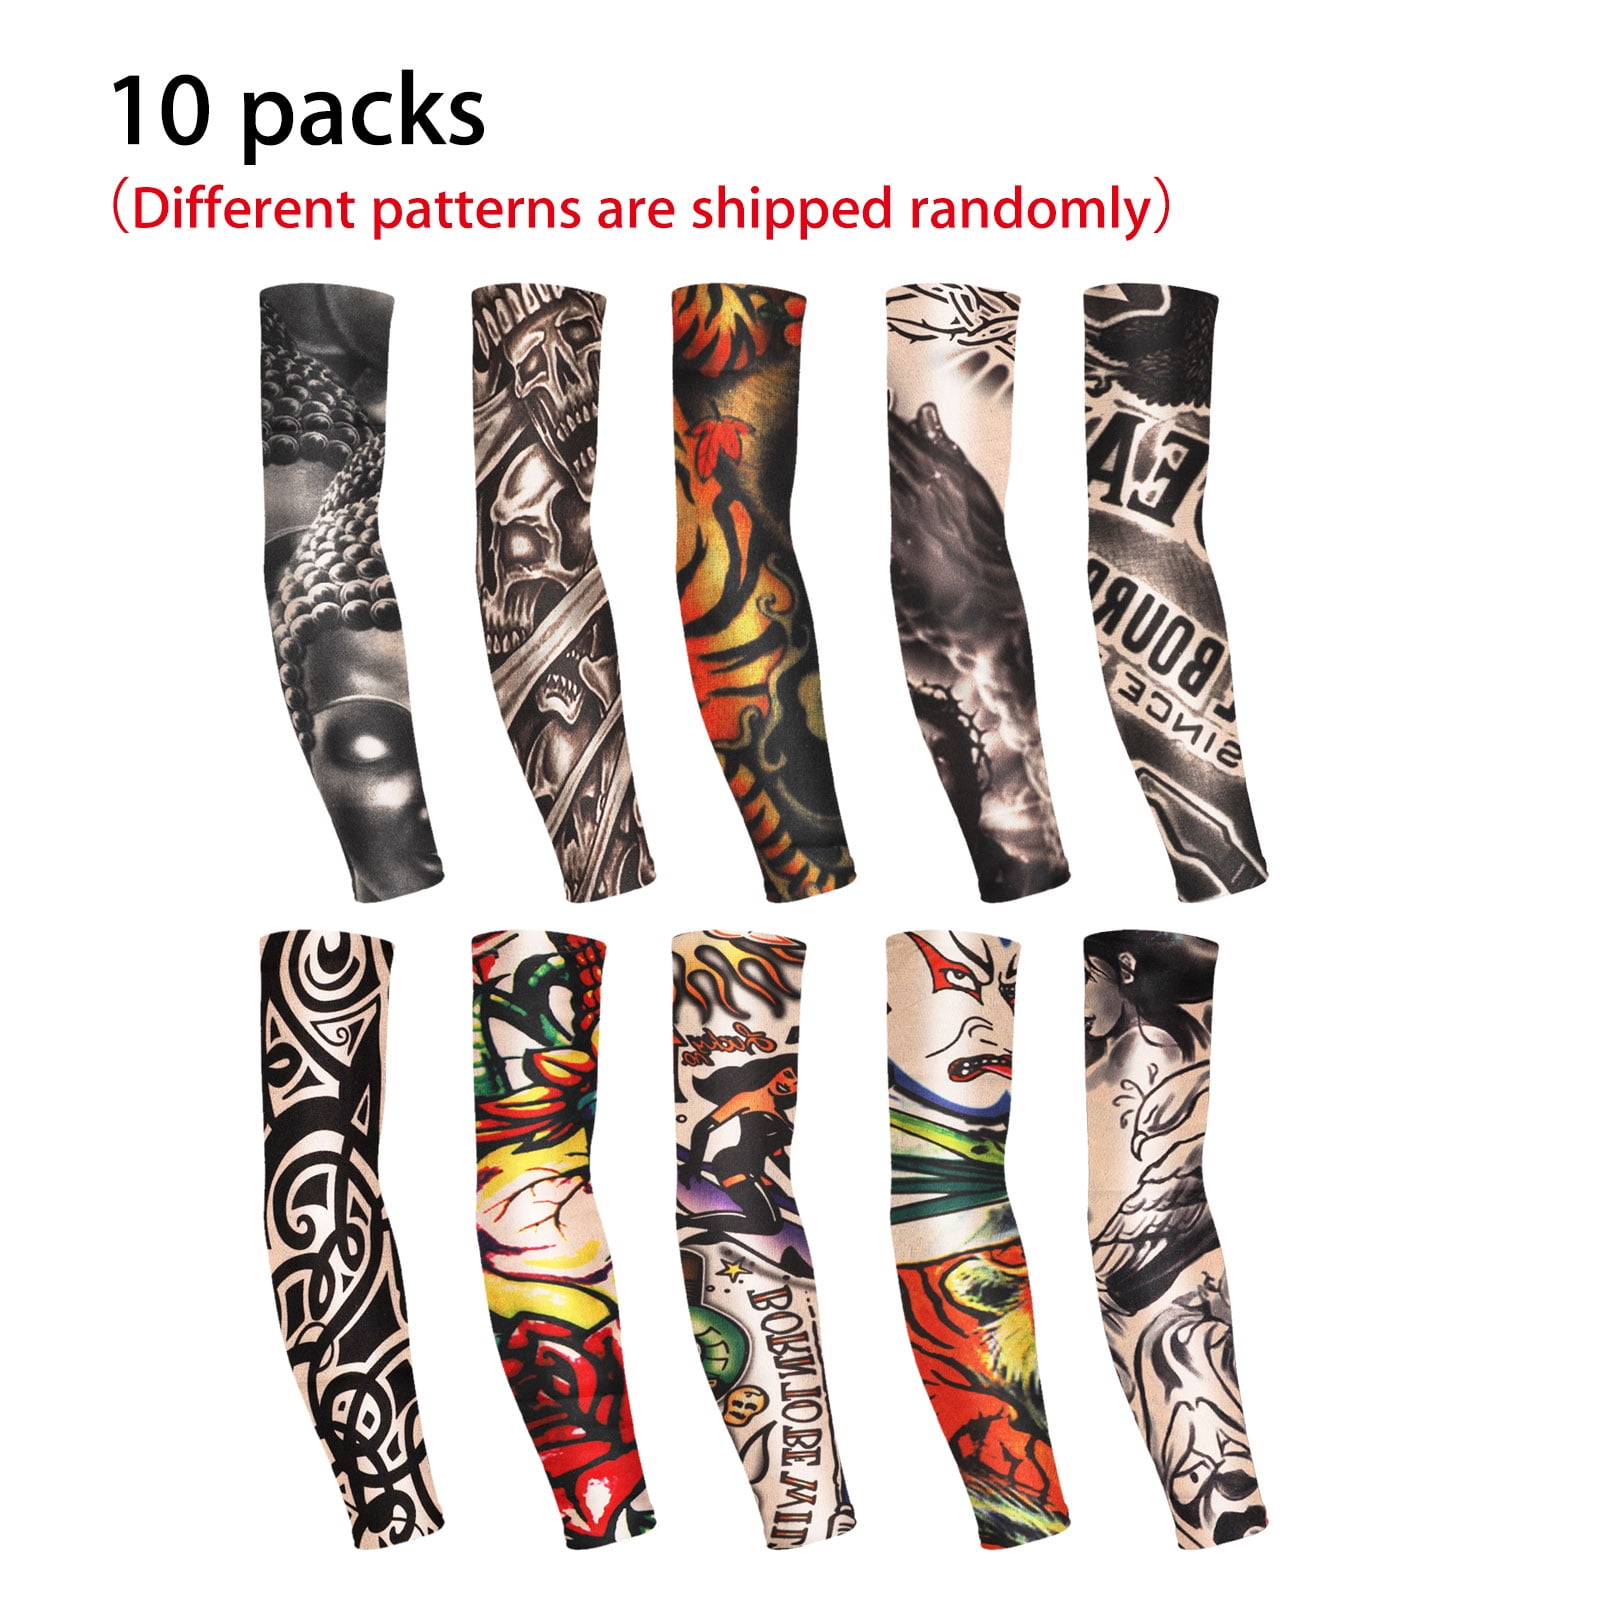 GP UV Sun Protection Arm Sleeves for Men Women UPF 50 Cooling Arm Sleeves to Cover Arms for Outdoor Sports 